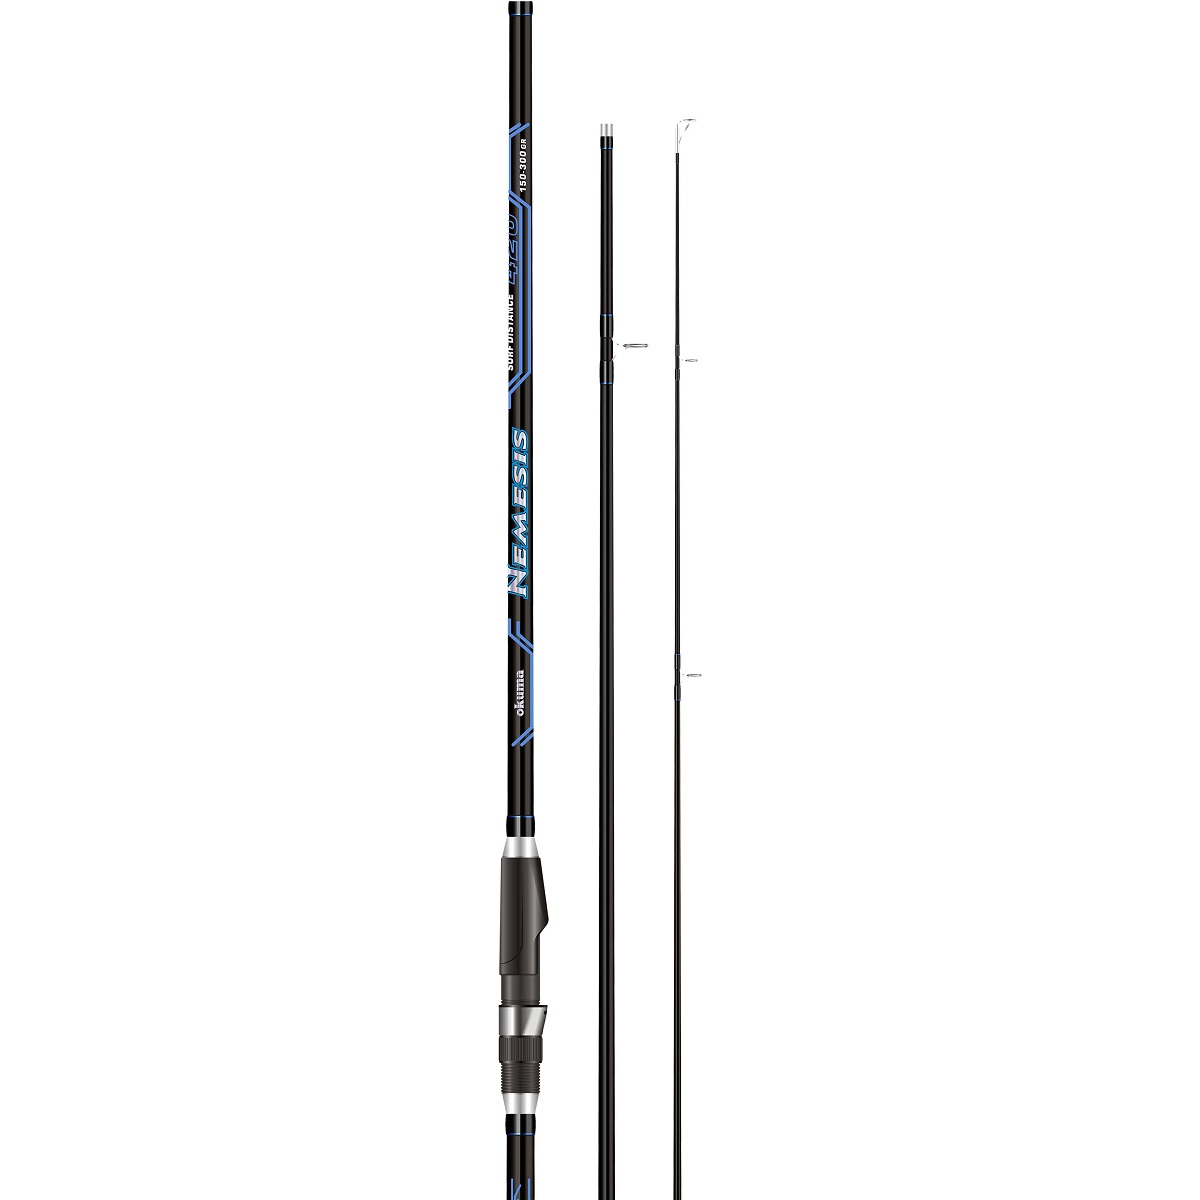 Nemesis Surf Rod - Okuma Nemesis Surf Rod-Ultra-responsive 24-carbon blank construction with solid tip-Quality stainless steel frame guides-Strong graphite reel seats